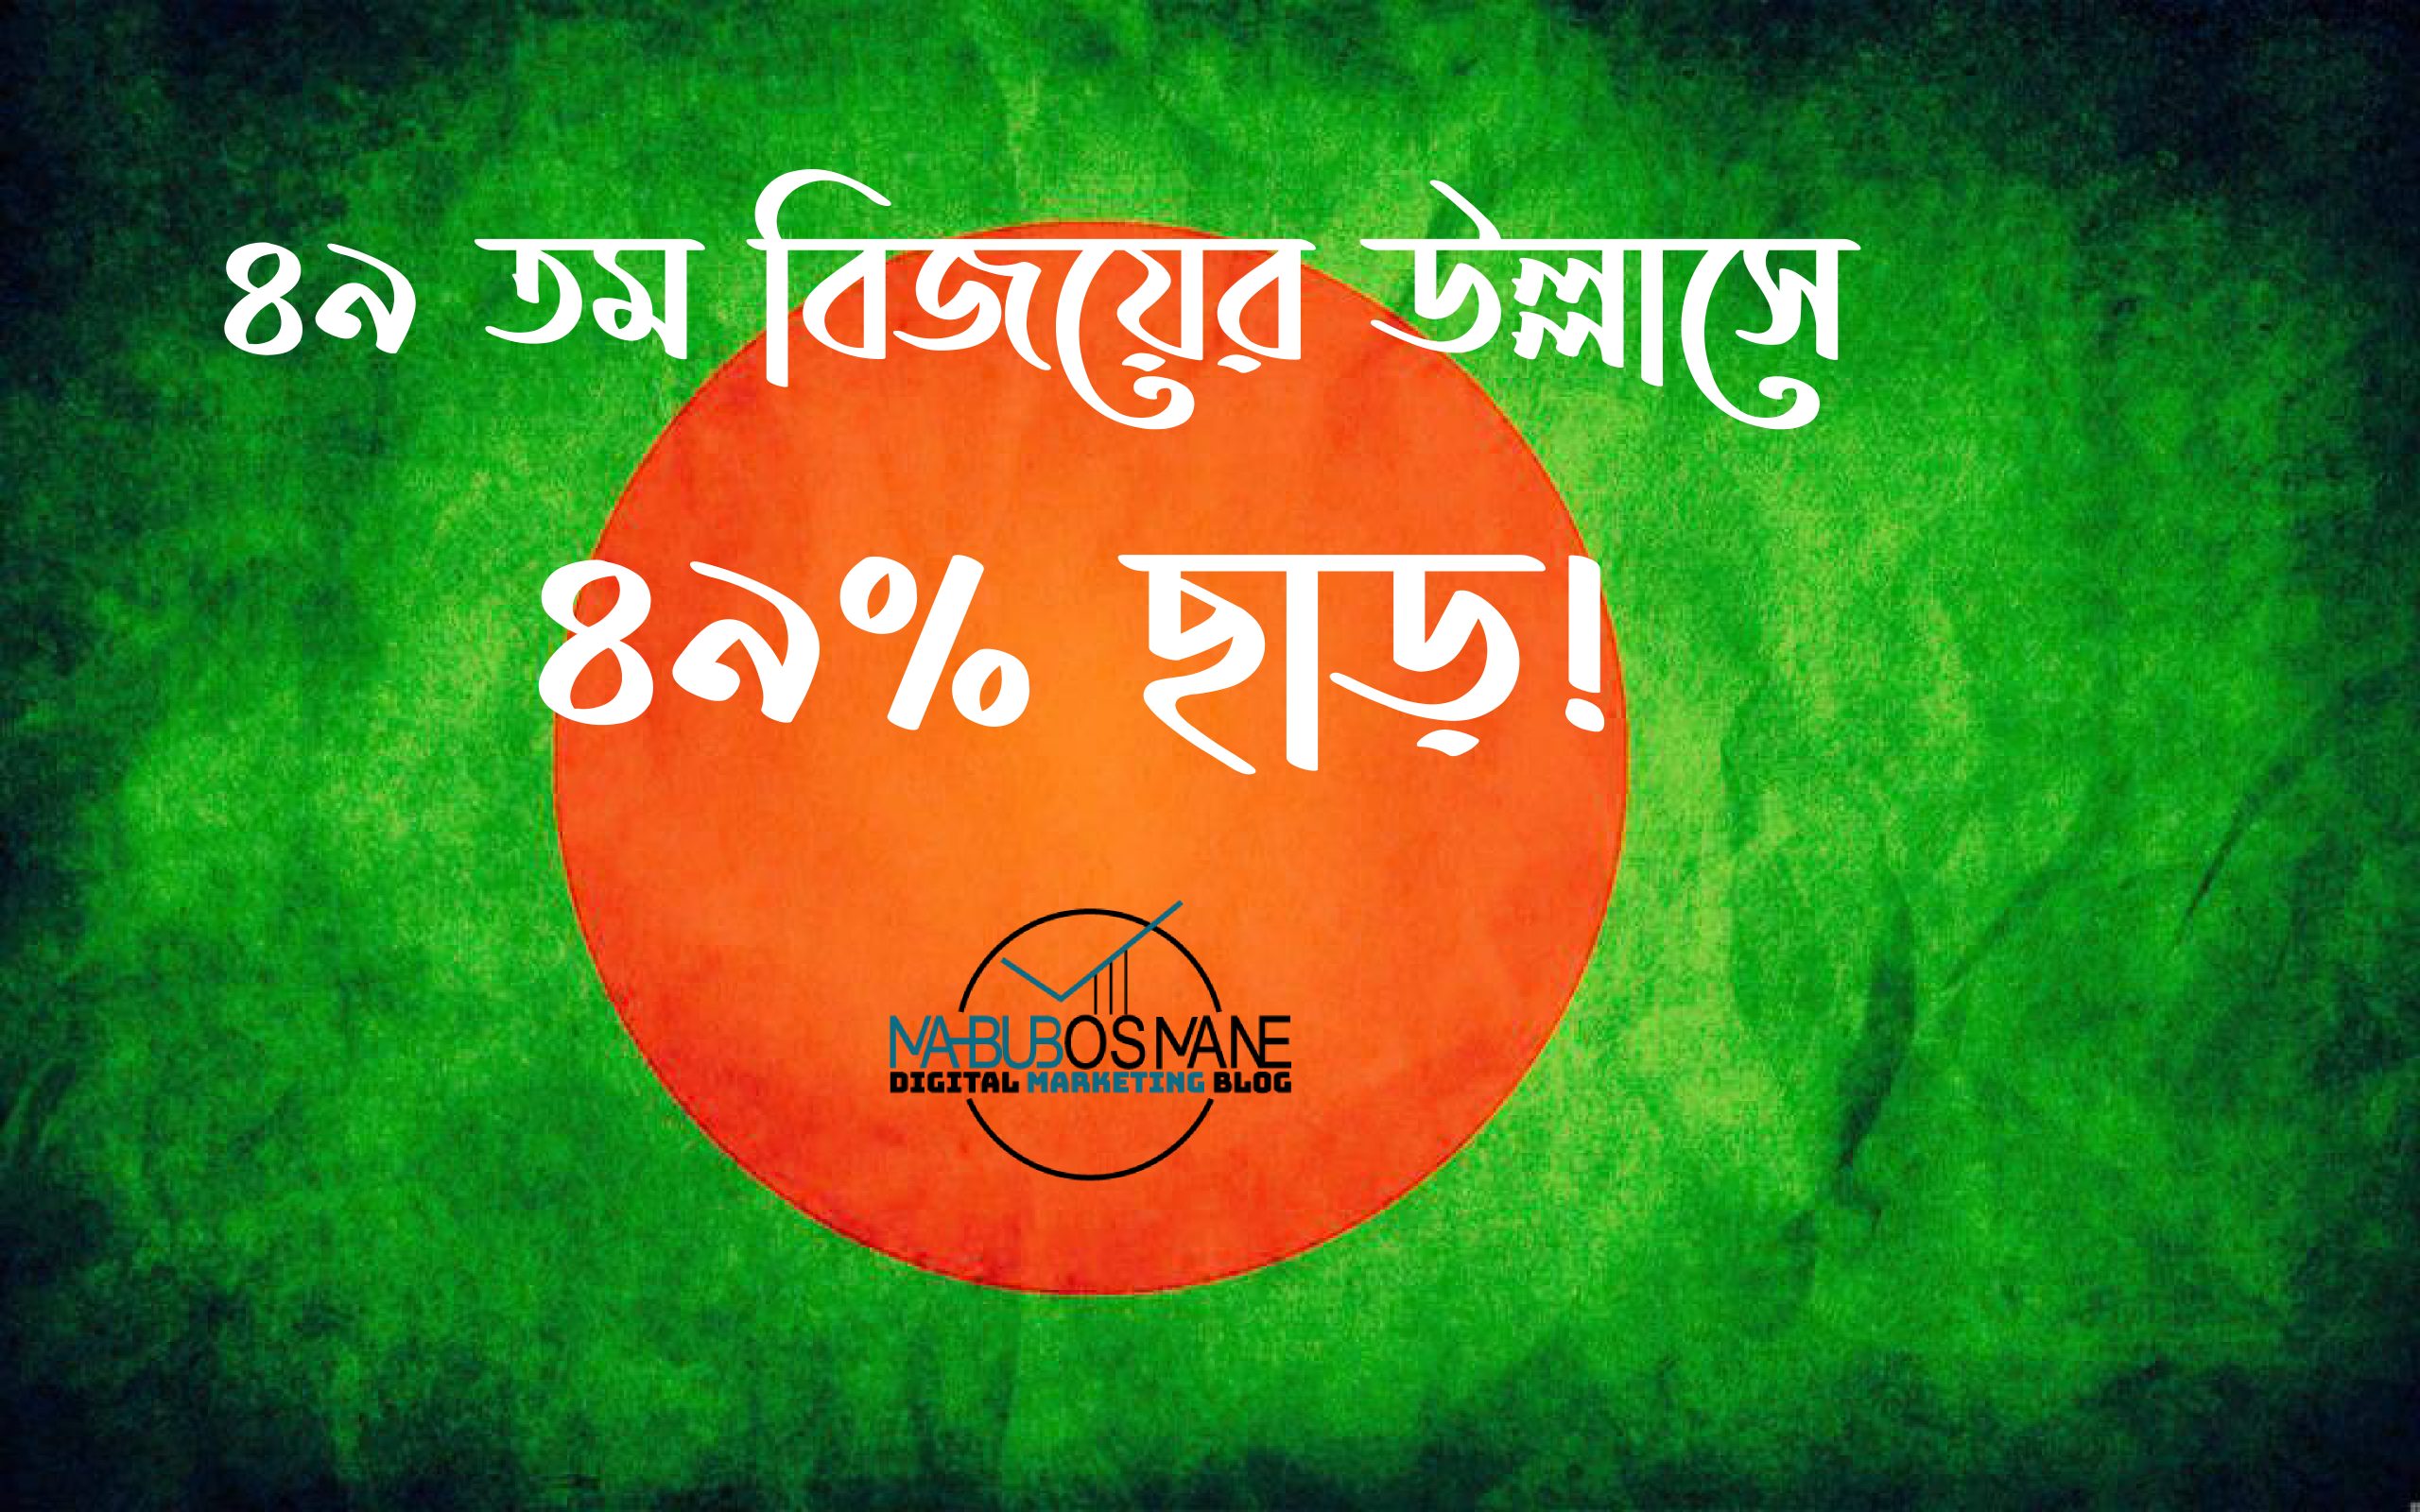 Victory Day Offer From MahbubOsmane